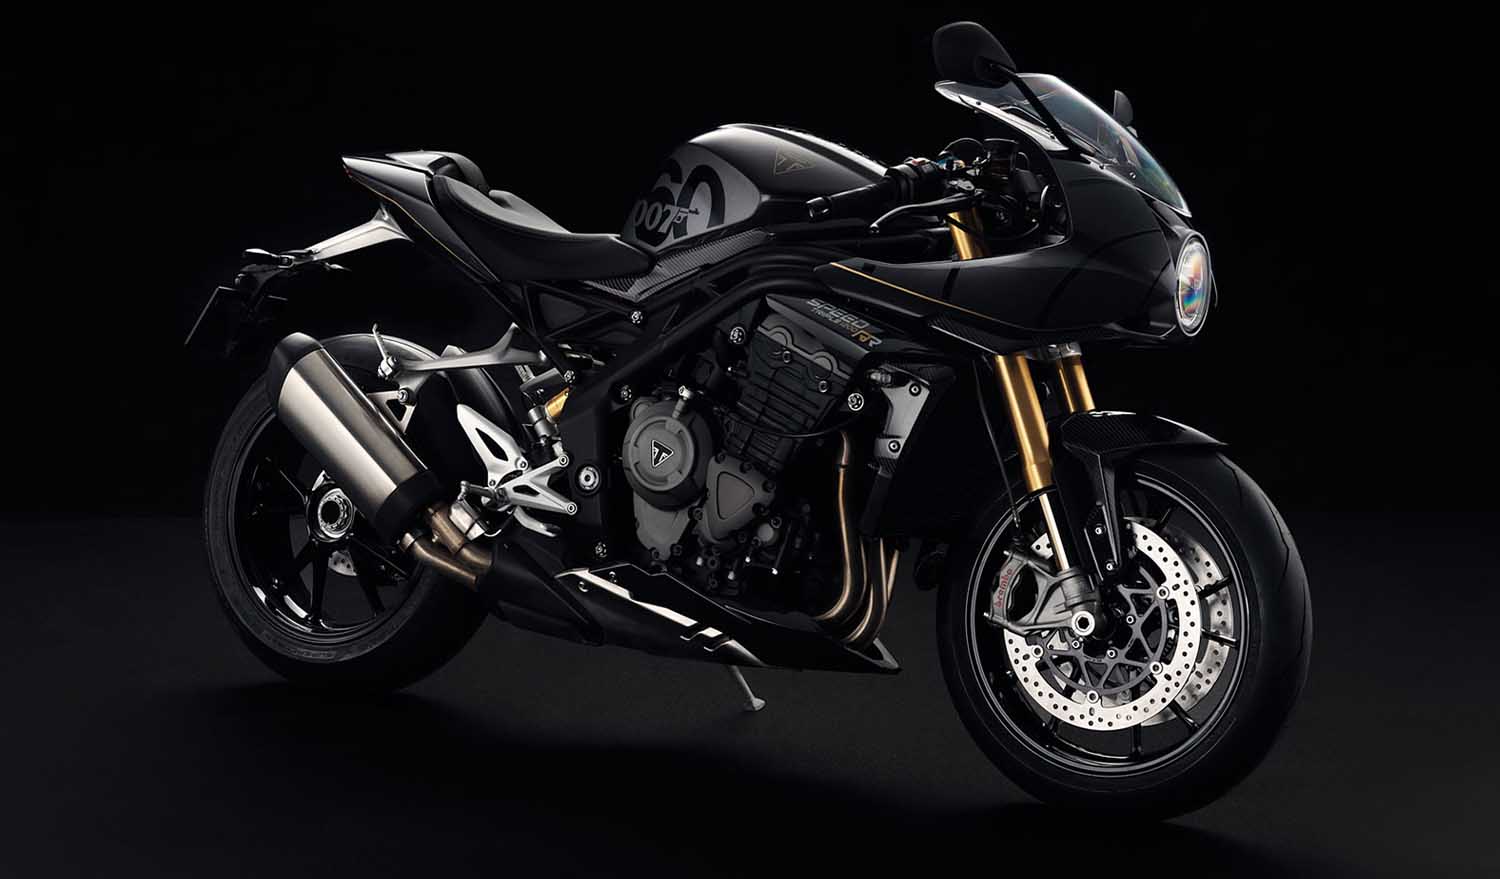 The Limited Edition Bond 007 Speed Triple 1200 RR side view